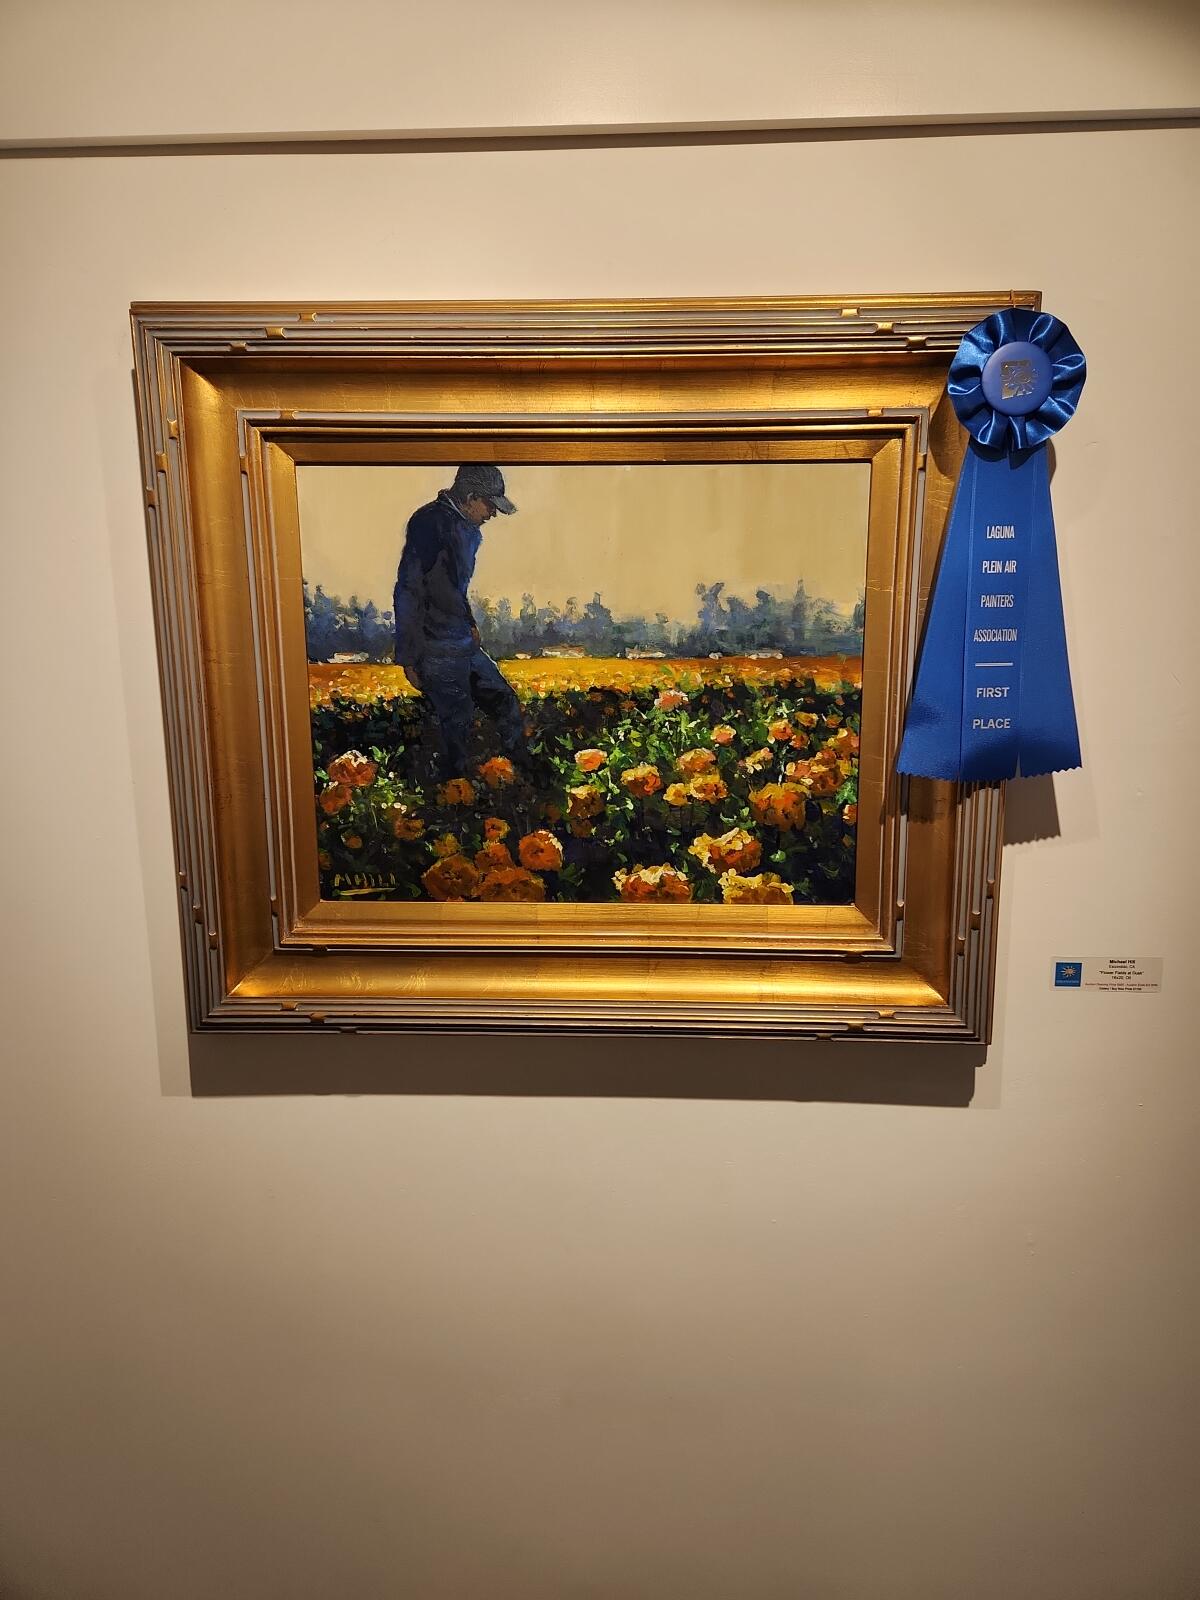 Michael Hill's "Flower Fields at Dusk" took first place in LPAPA's "From Dusk to Dawn" juried art show.